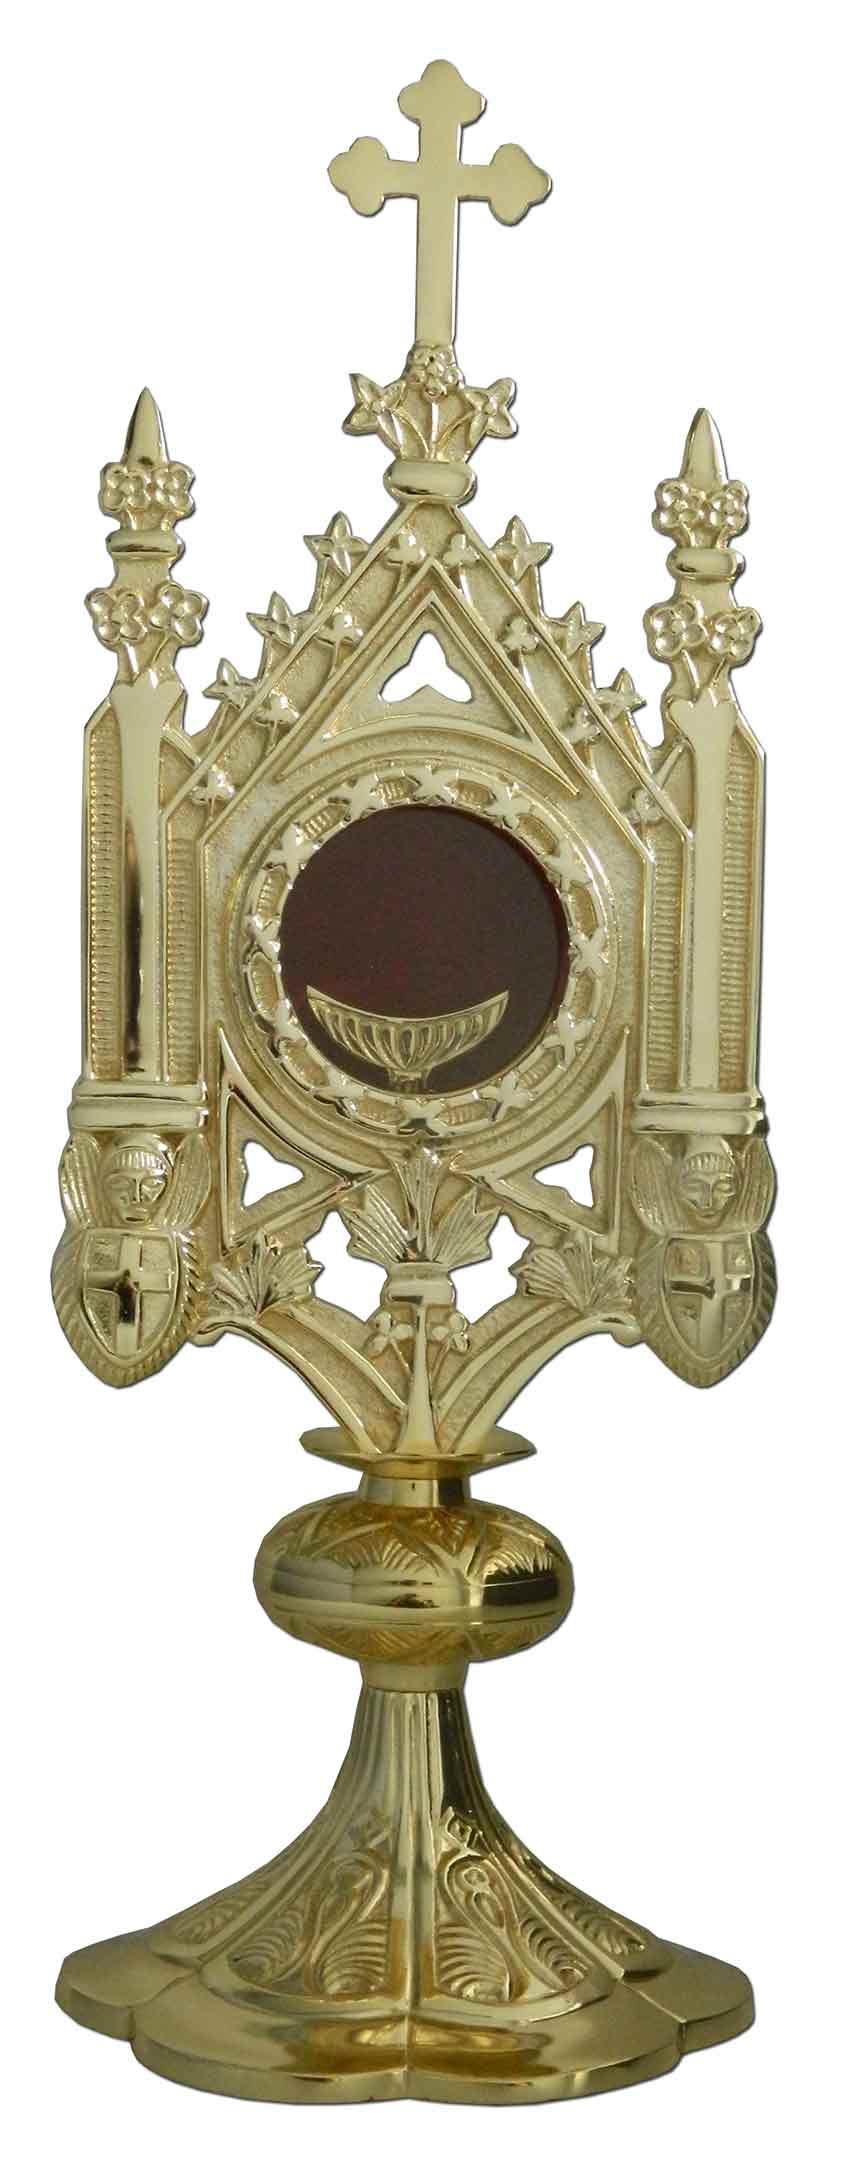 Gothic monstrance made of bronze